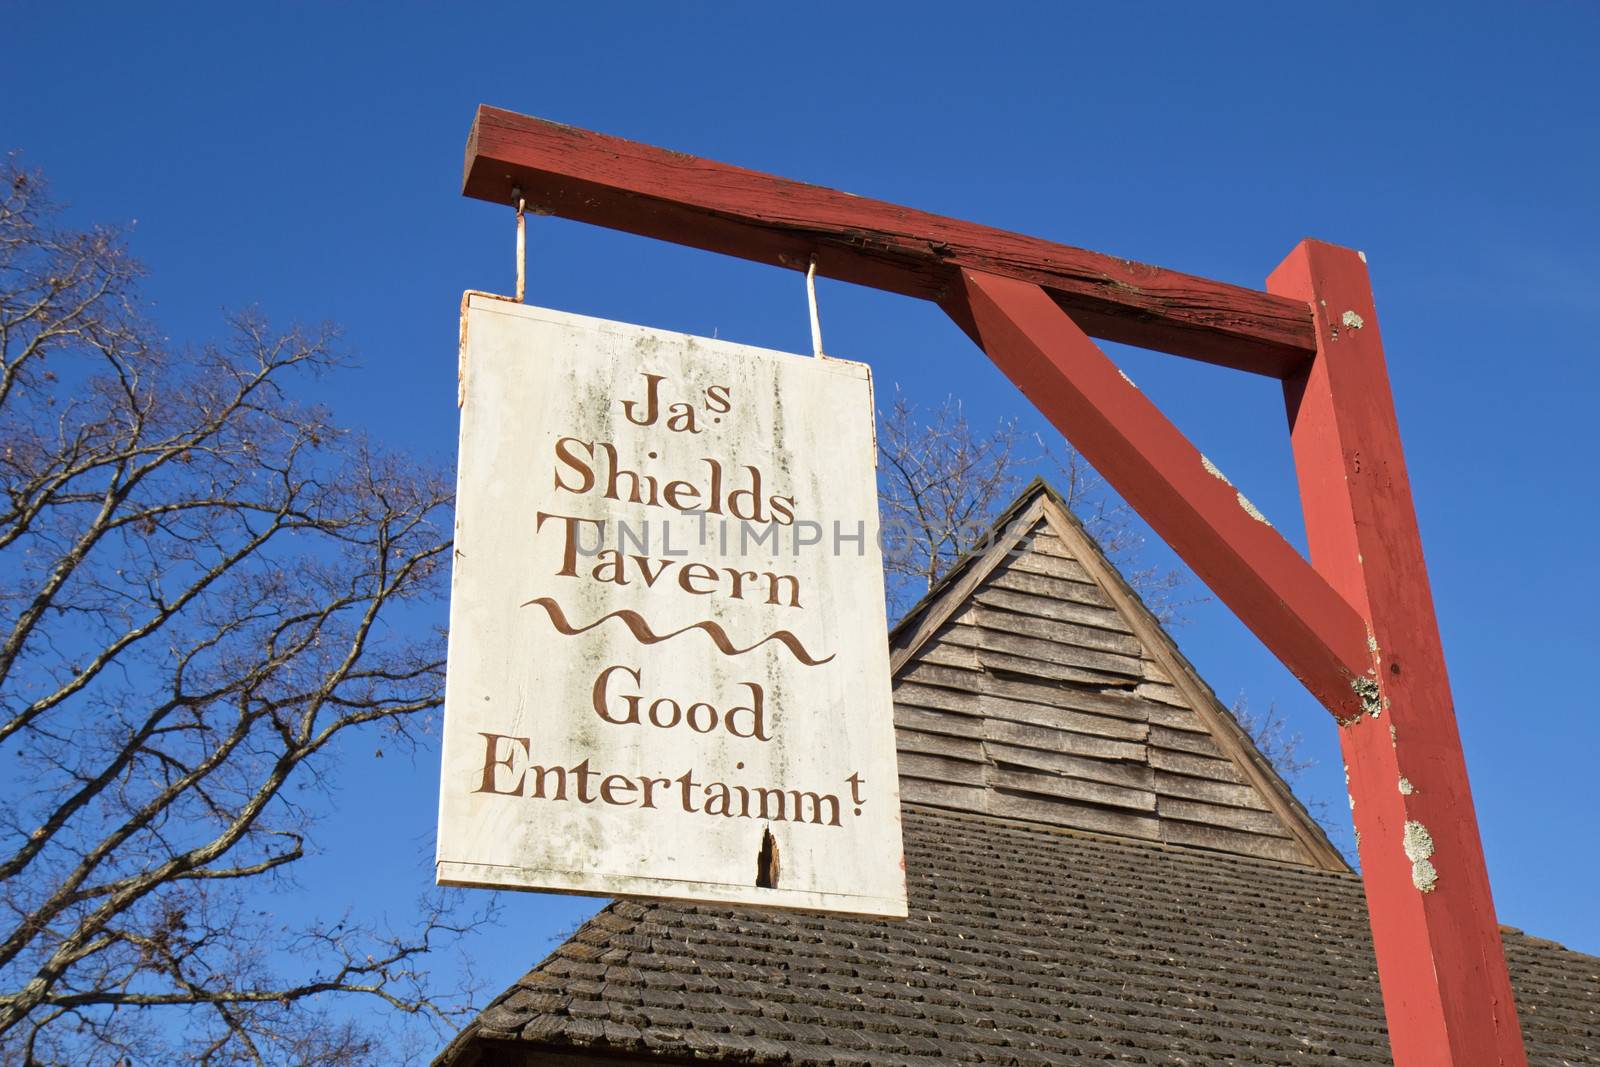 WILLIAMSBURG, VIRGINIA - NOVEMBER 27: Sign for Shields Tavern in Colonial Williamsburg, Virginia, November 27, 2011. The restored town is a major attraction for tourists and meetings of world leaders.